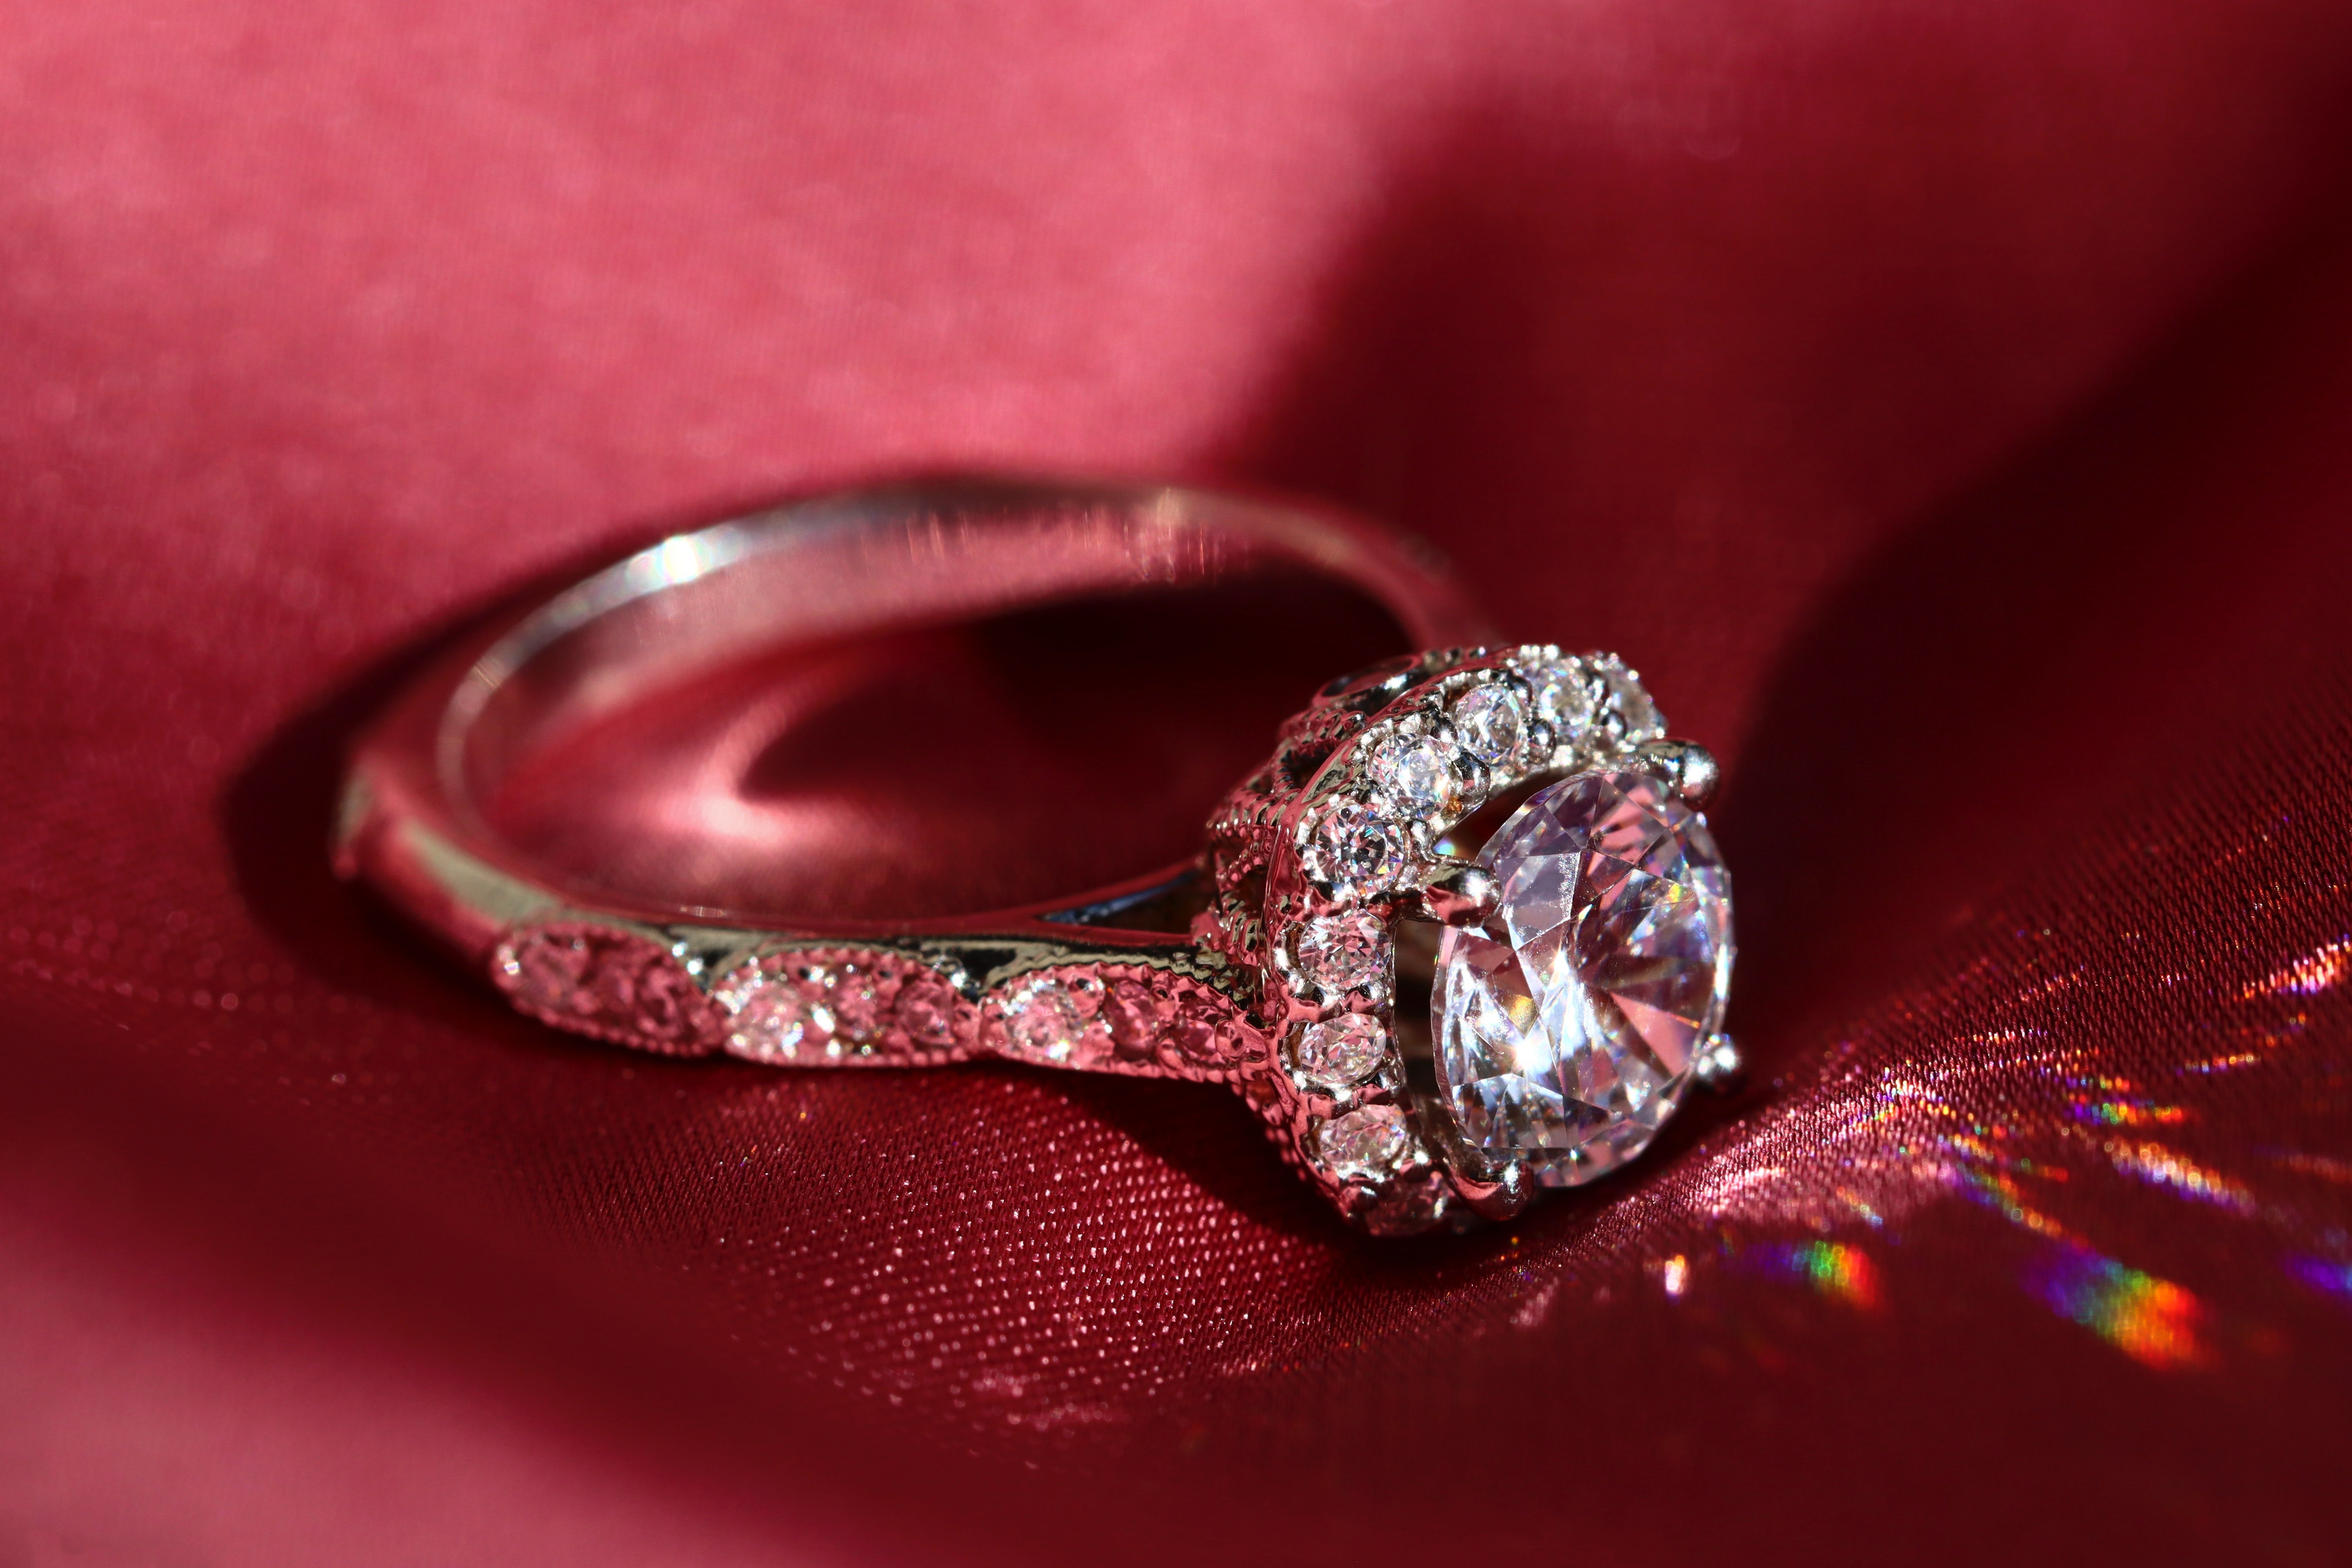 Bart proposed with a stunning ring. | Source: Unsplash